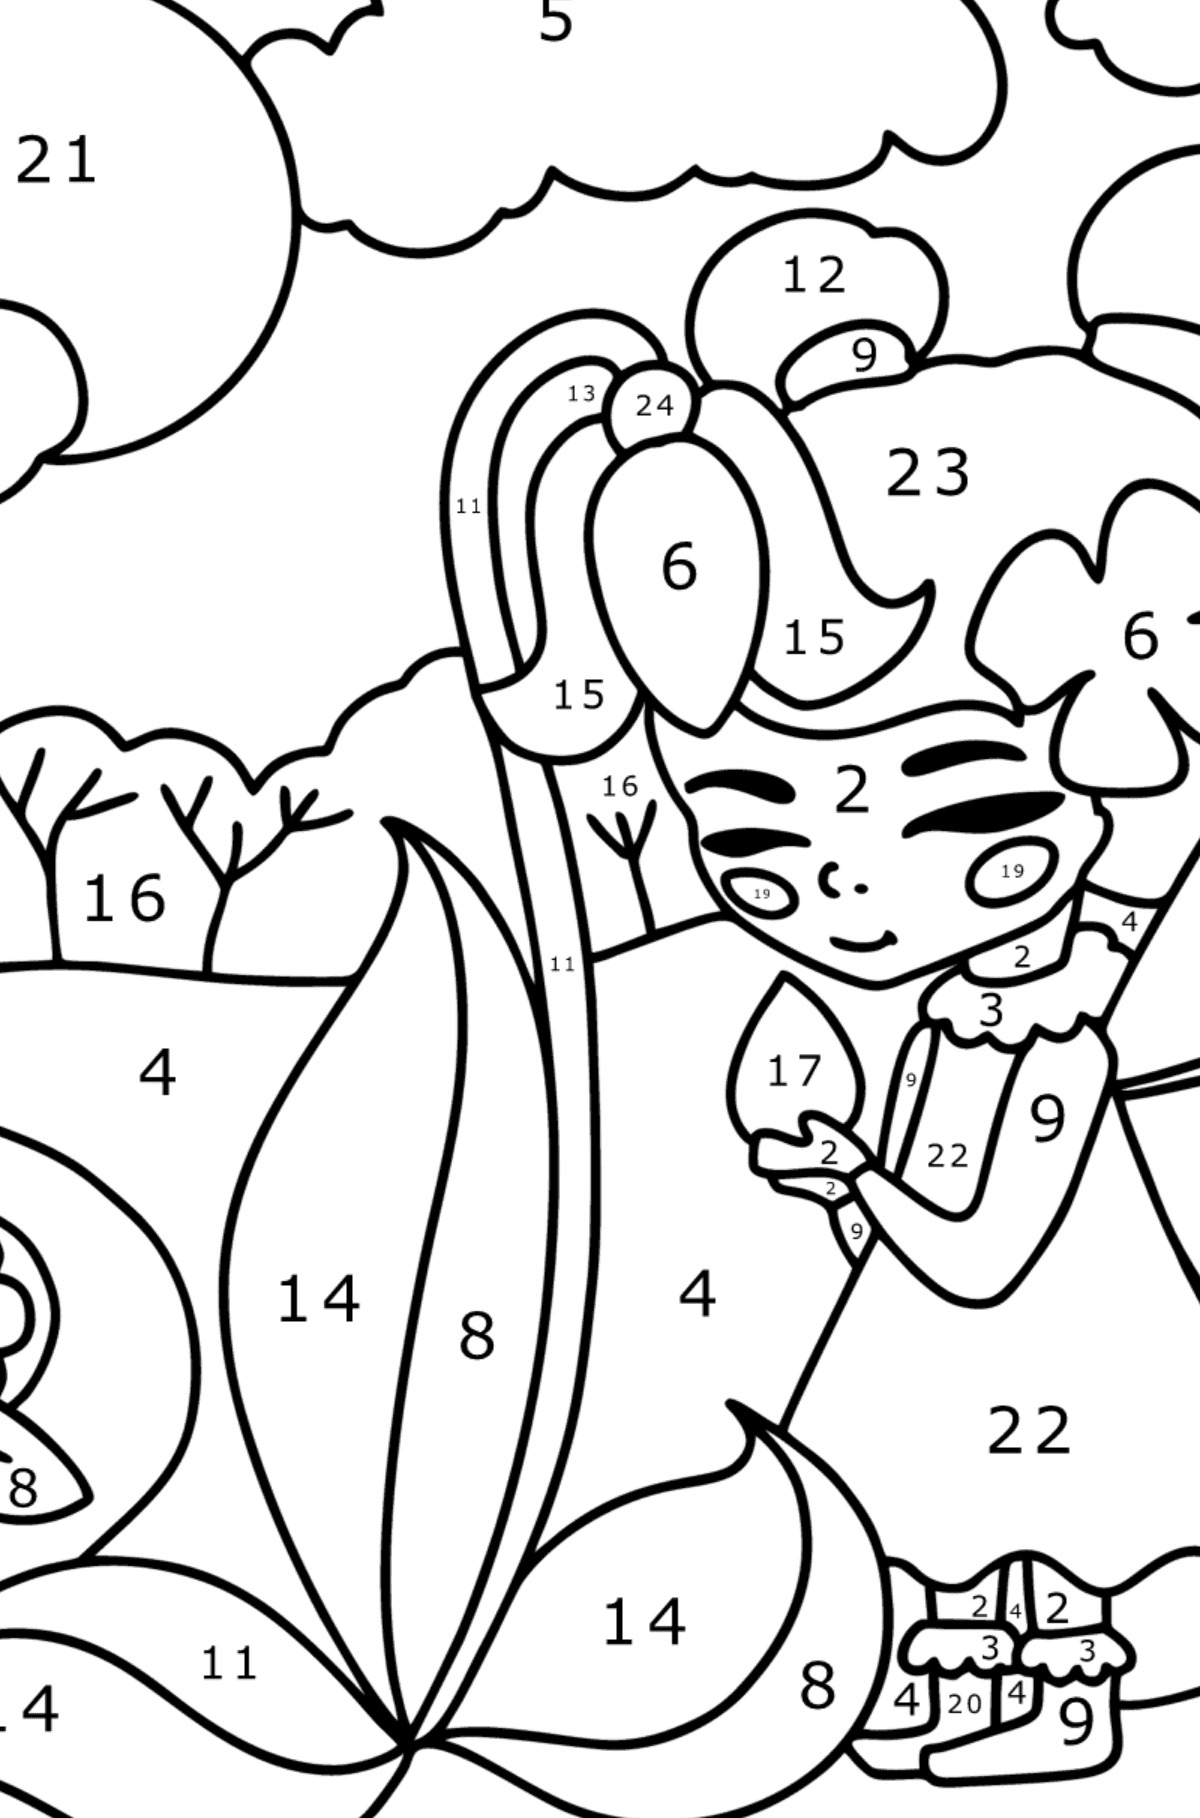 Fairy on a forest path coloring page - Coloring by Numbers for Kids